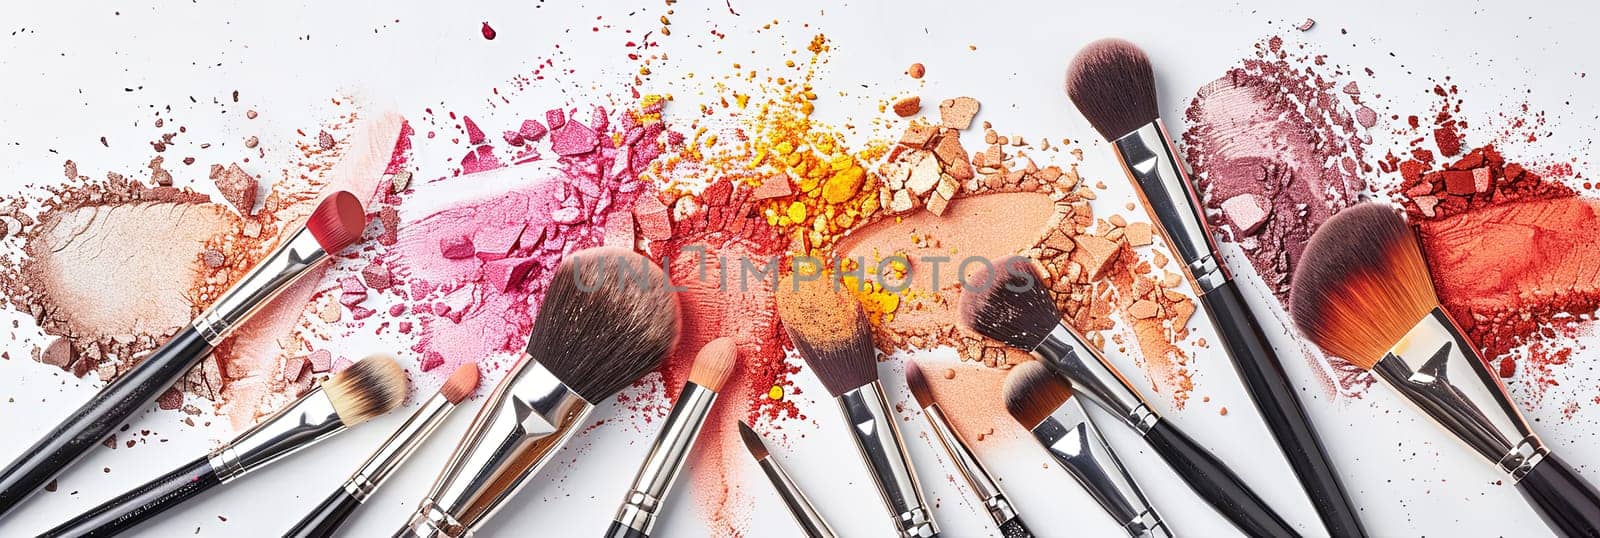 A close-up shot of makeup brushes covered in colorful eyeshadow and blush on a white background.